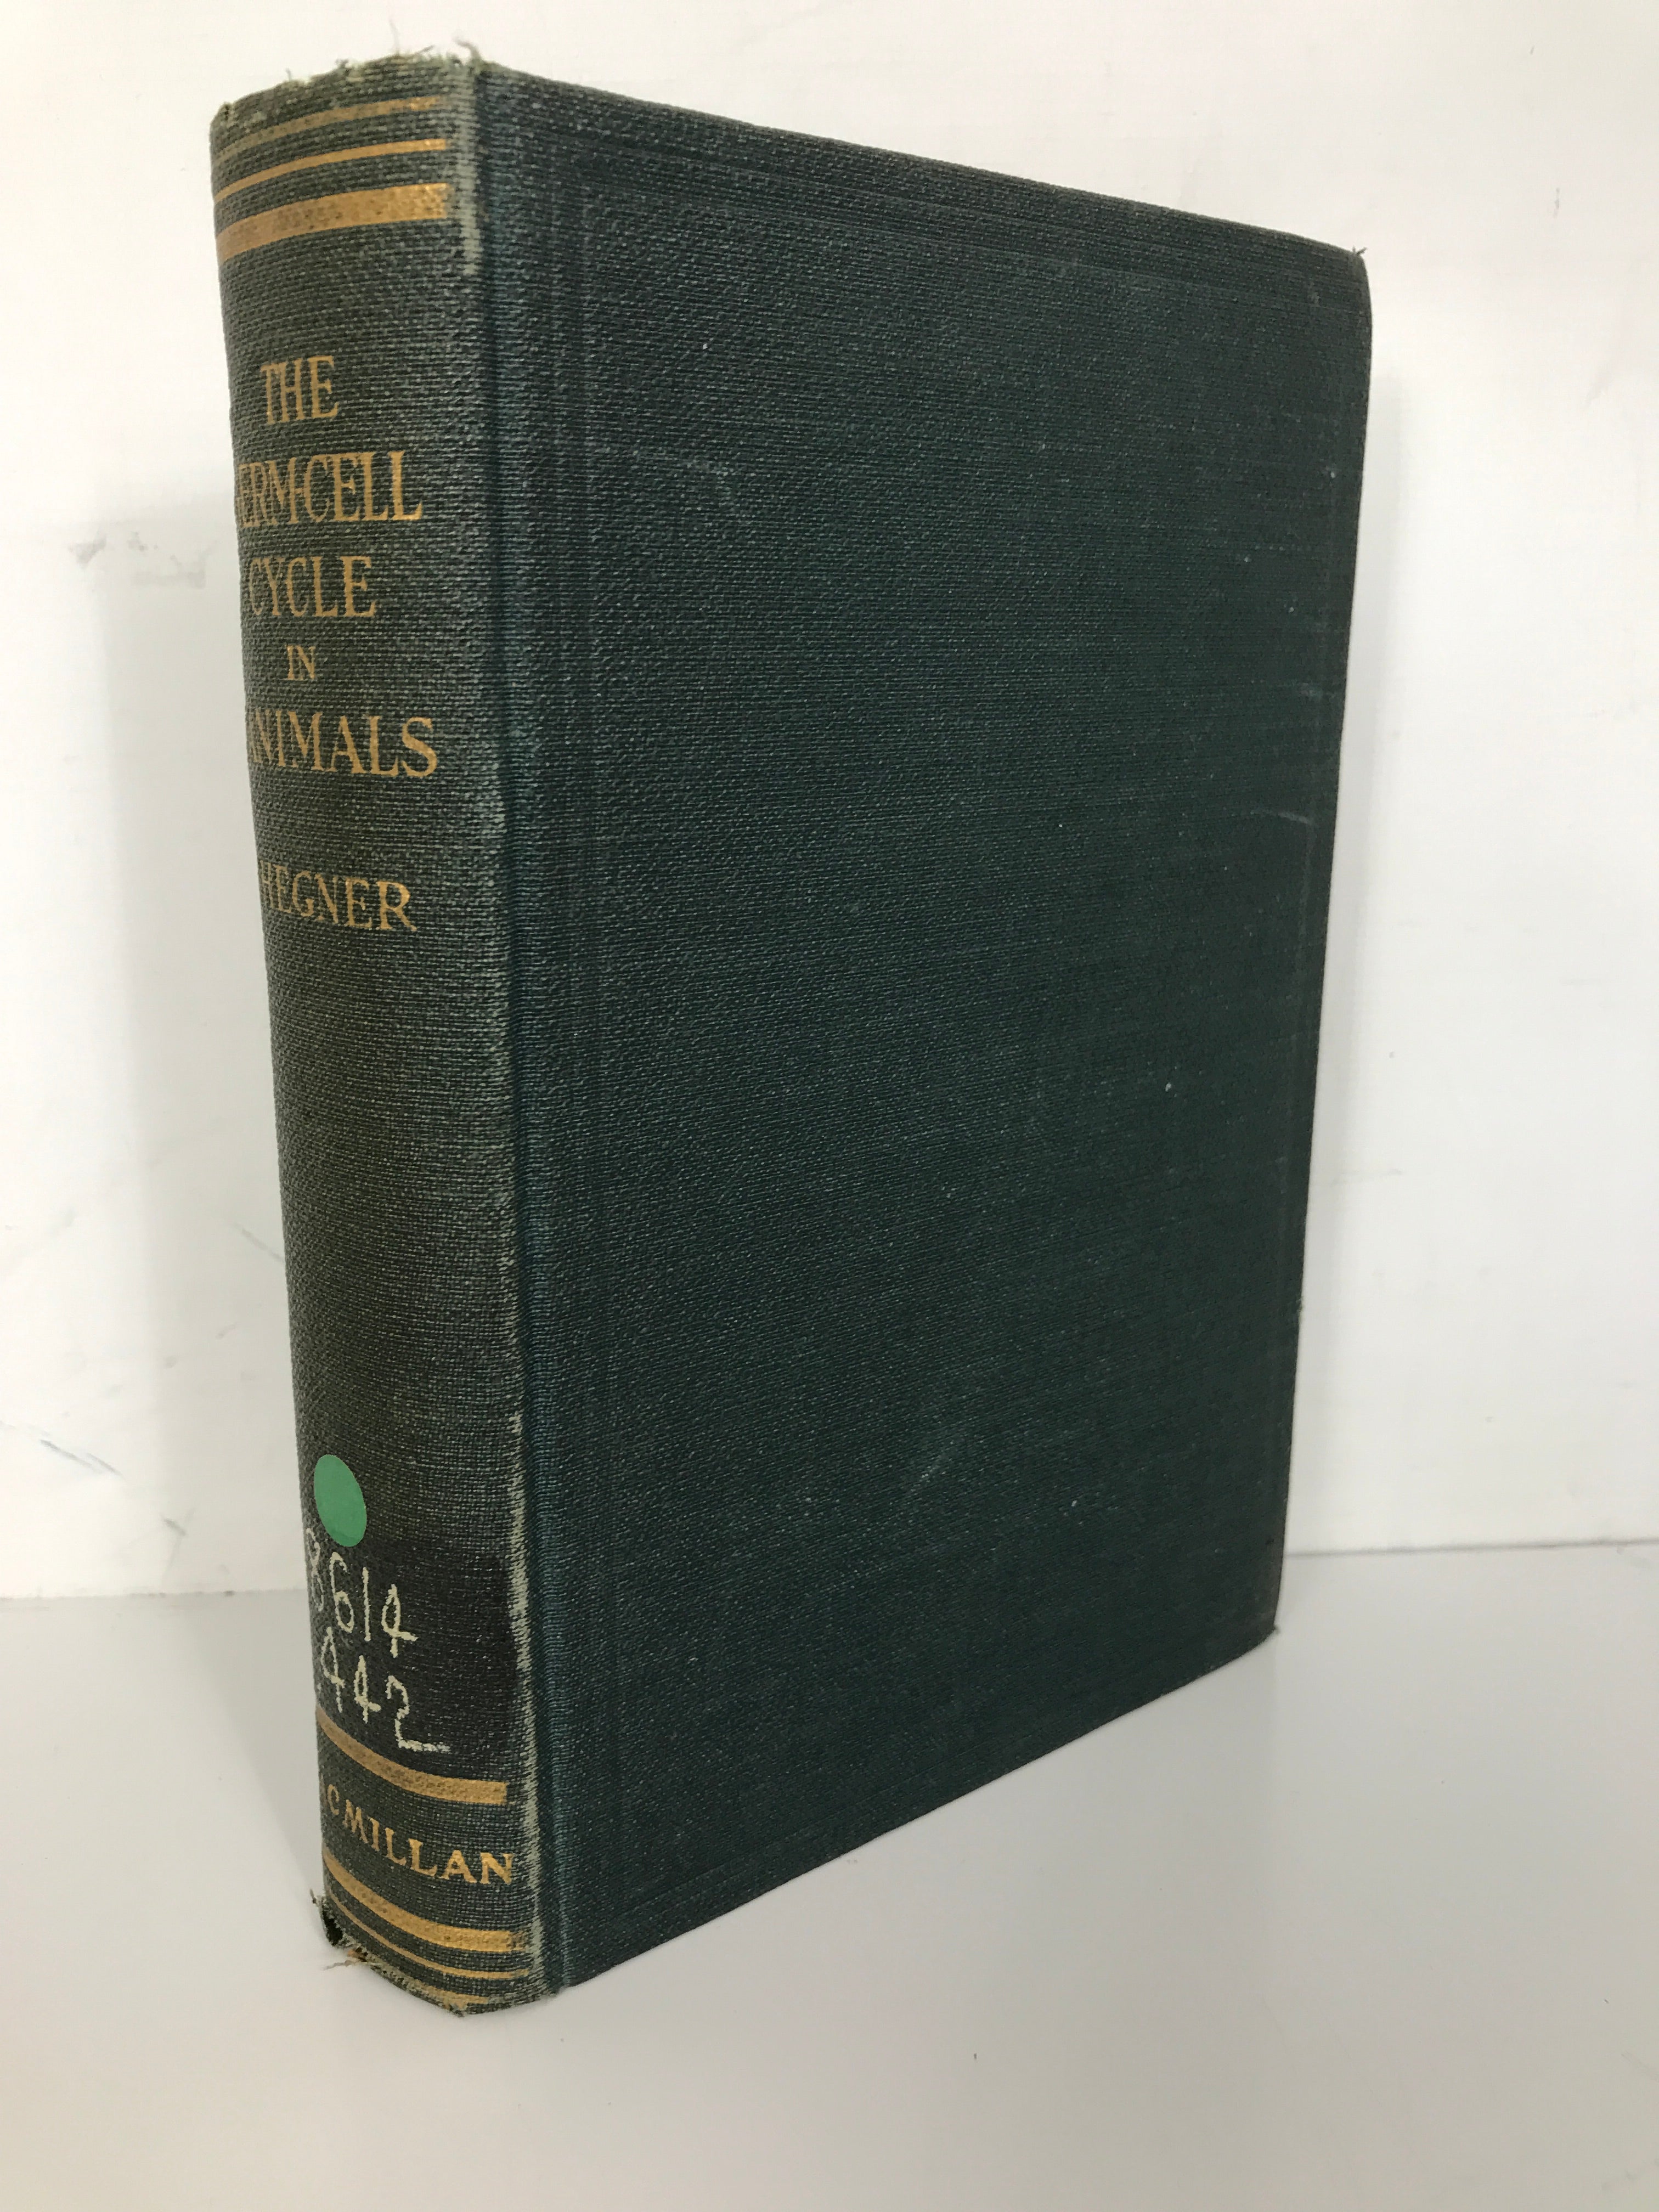 The Germ-Cell Cycle in Animals by Robert Hegner 1914 Antique HC